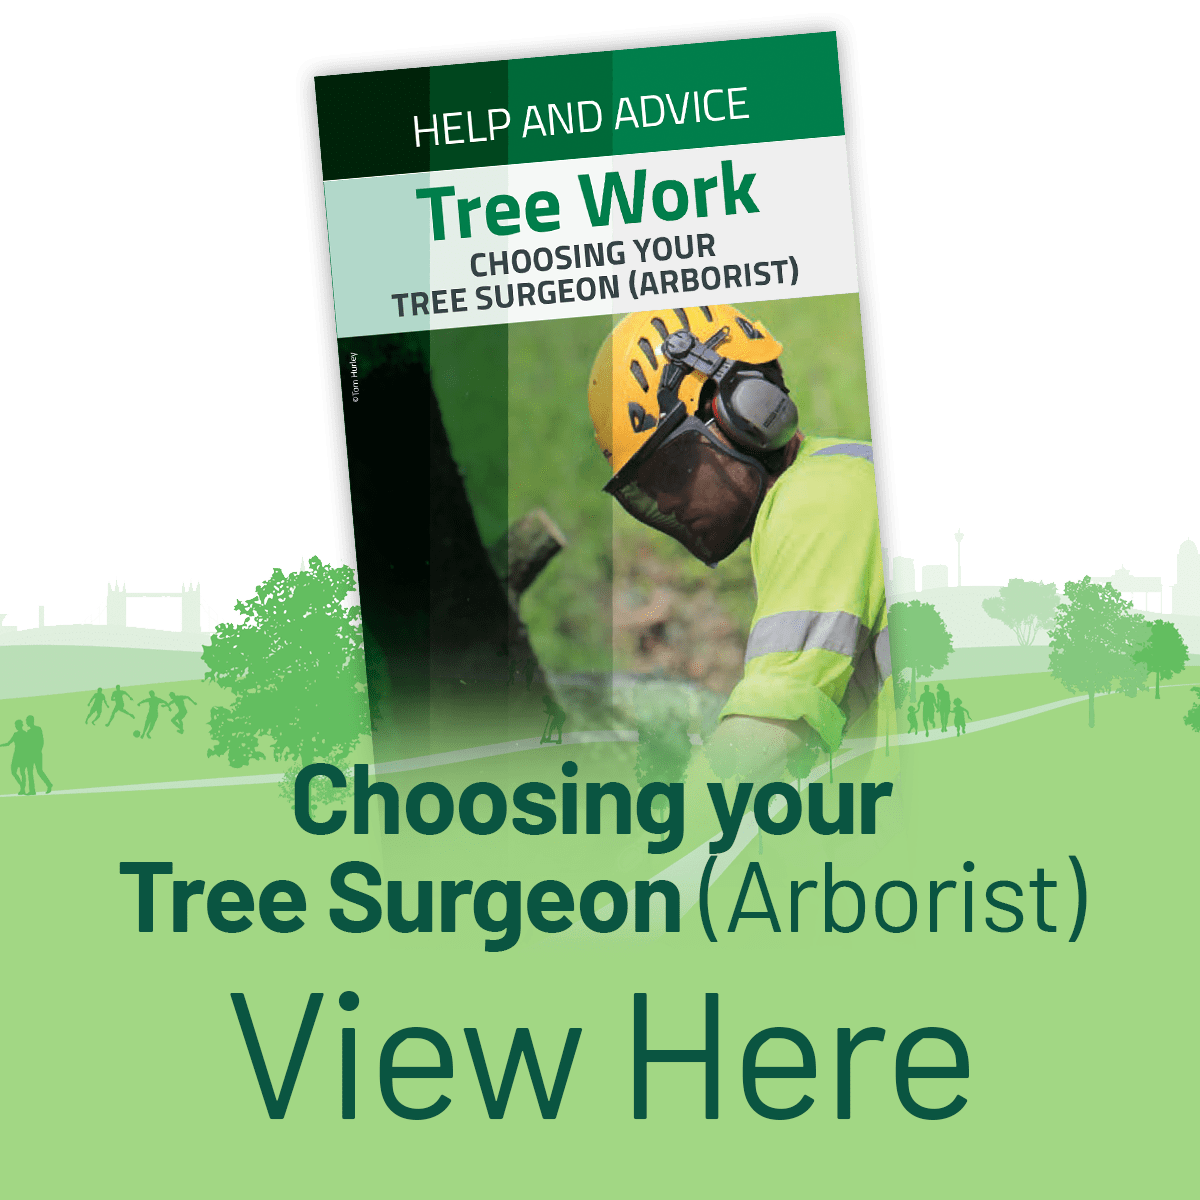 View the Choosing Your Arborist Leaflet